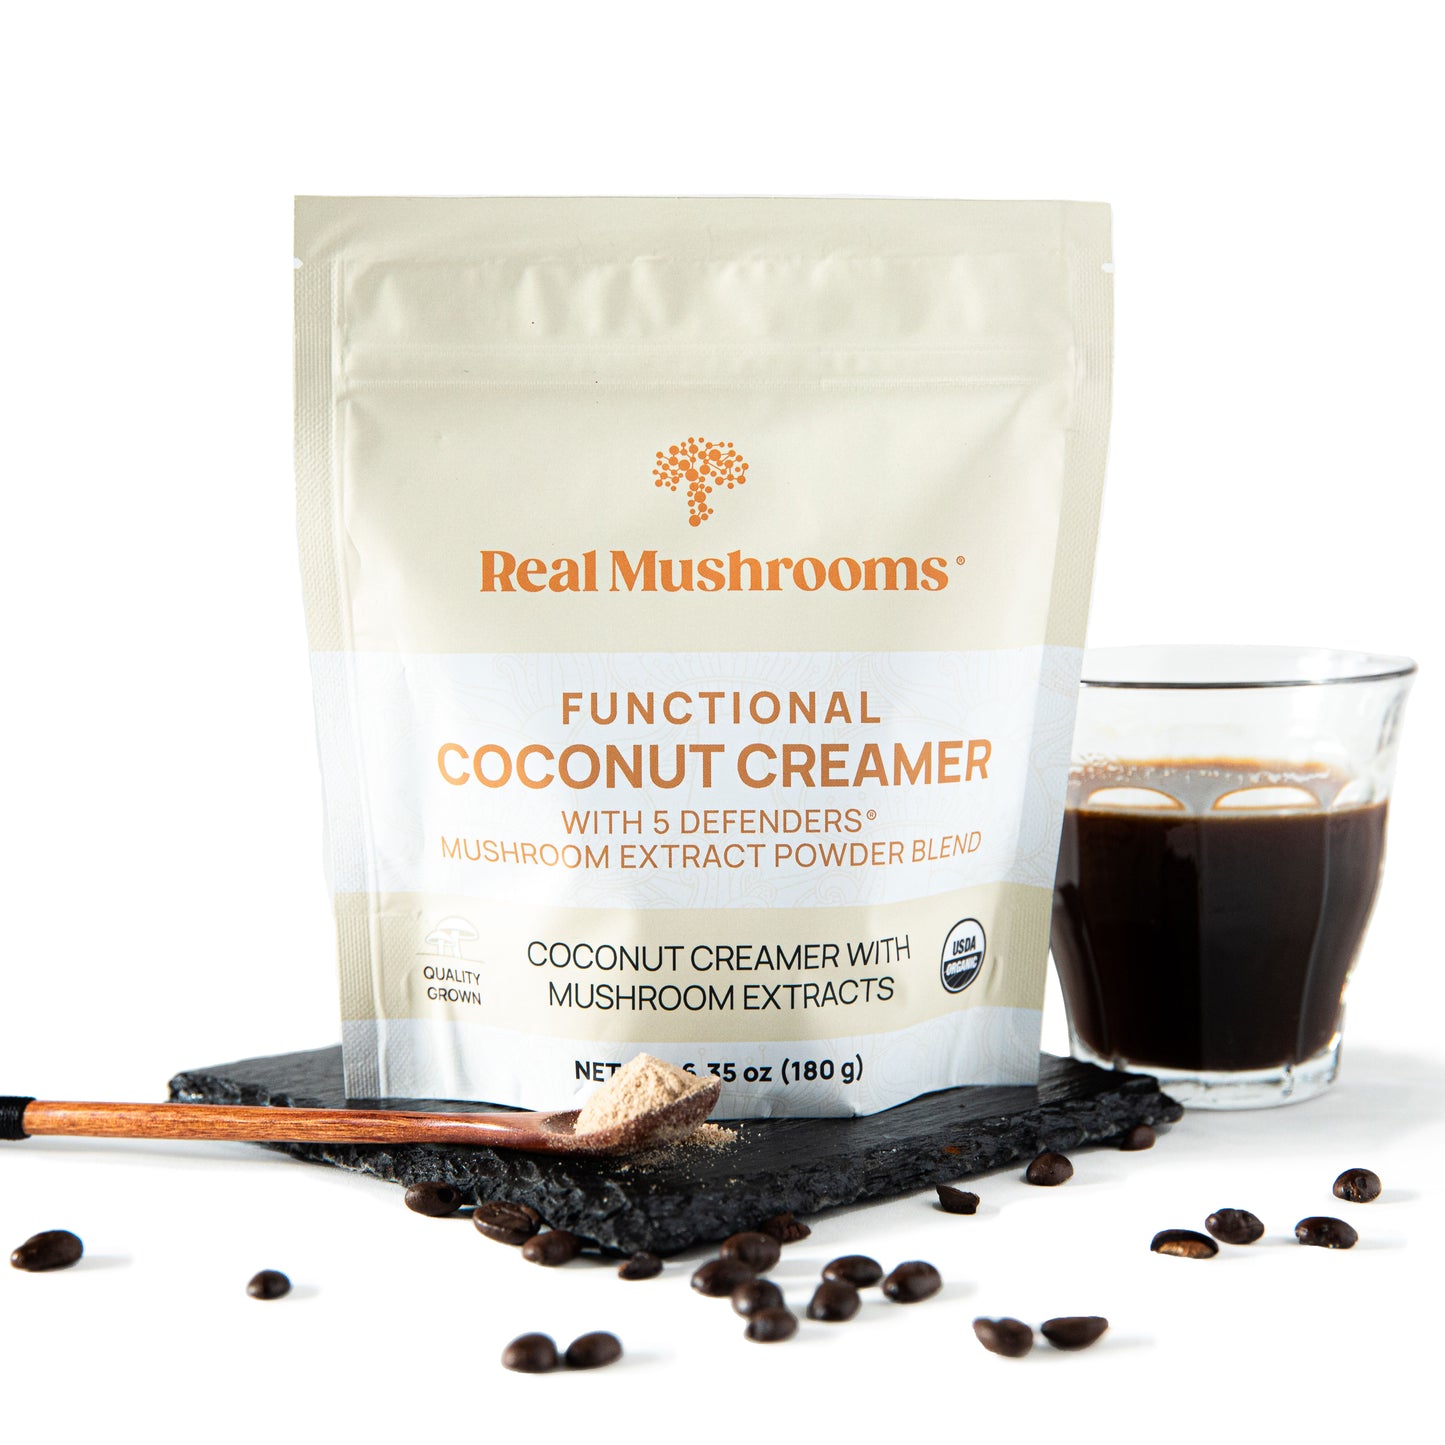 Functional Coconut Creamer - Powder by Real Mushrooms combined with dairy-free coconut creamer for a functional and delicious beverage option.